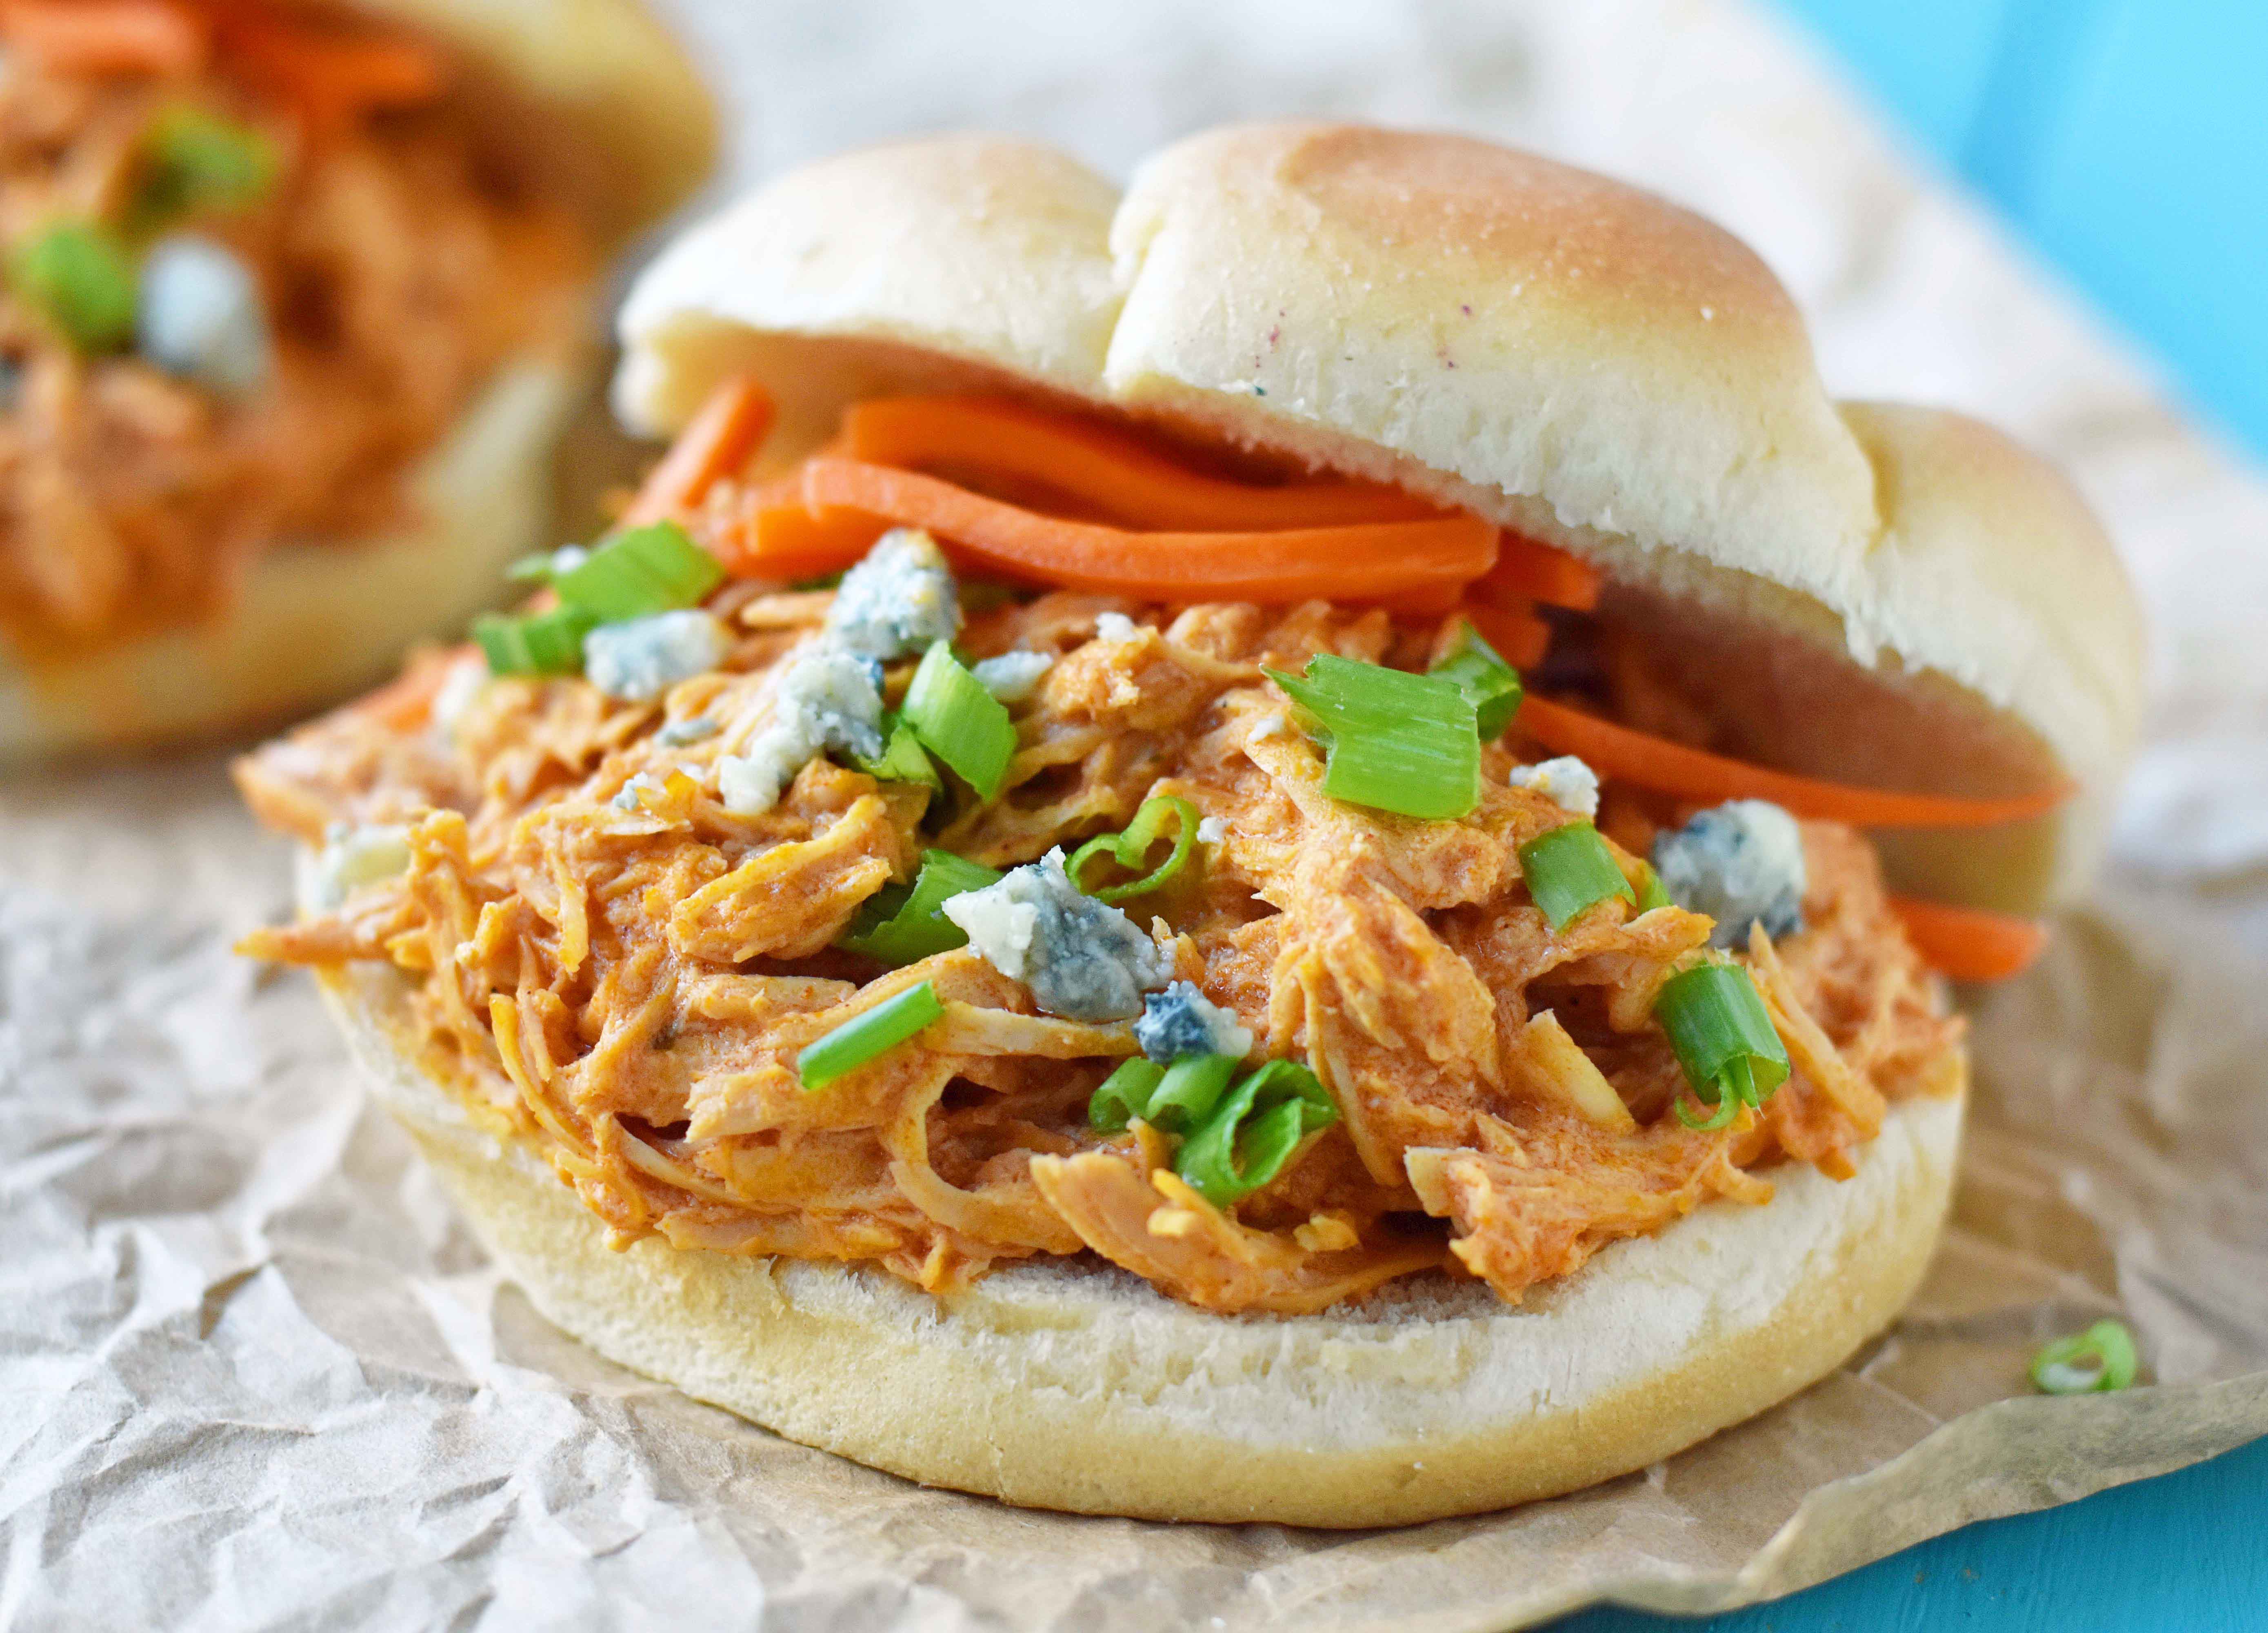 Buffalo Ranch Slow Cooker Chicken made with chicken breast, ranch dressing powder, buffalo wing sauce and cream cheese. This buffalo ranch chicken is made with only 4 ingredients. Can be made into buffalo chicken sliders. Perfect for football tailgate parties or potlucks. www.modernhoney.com